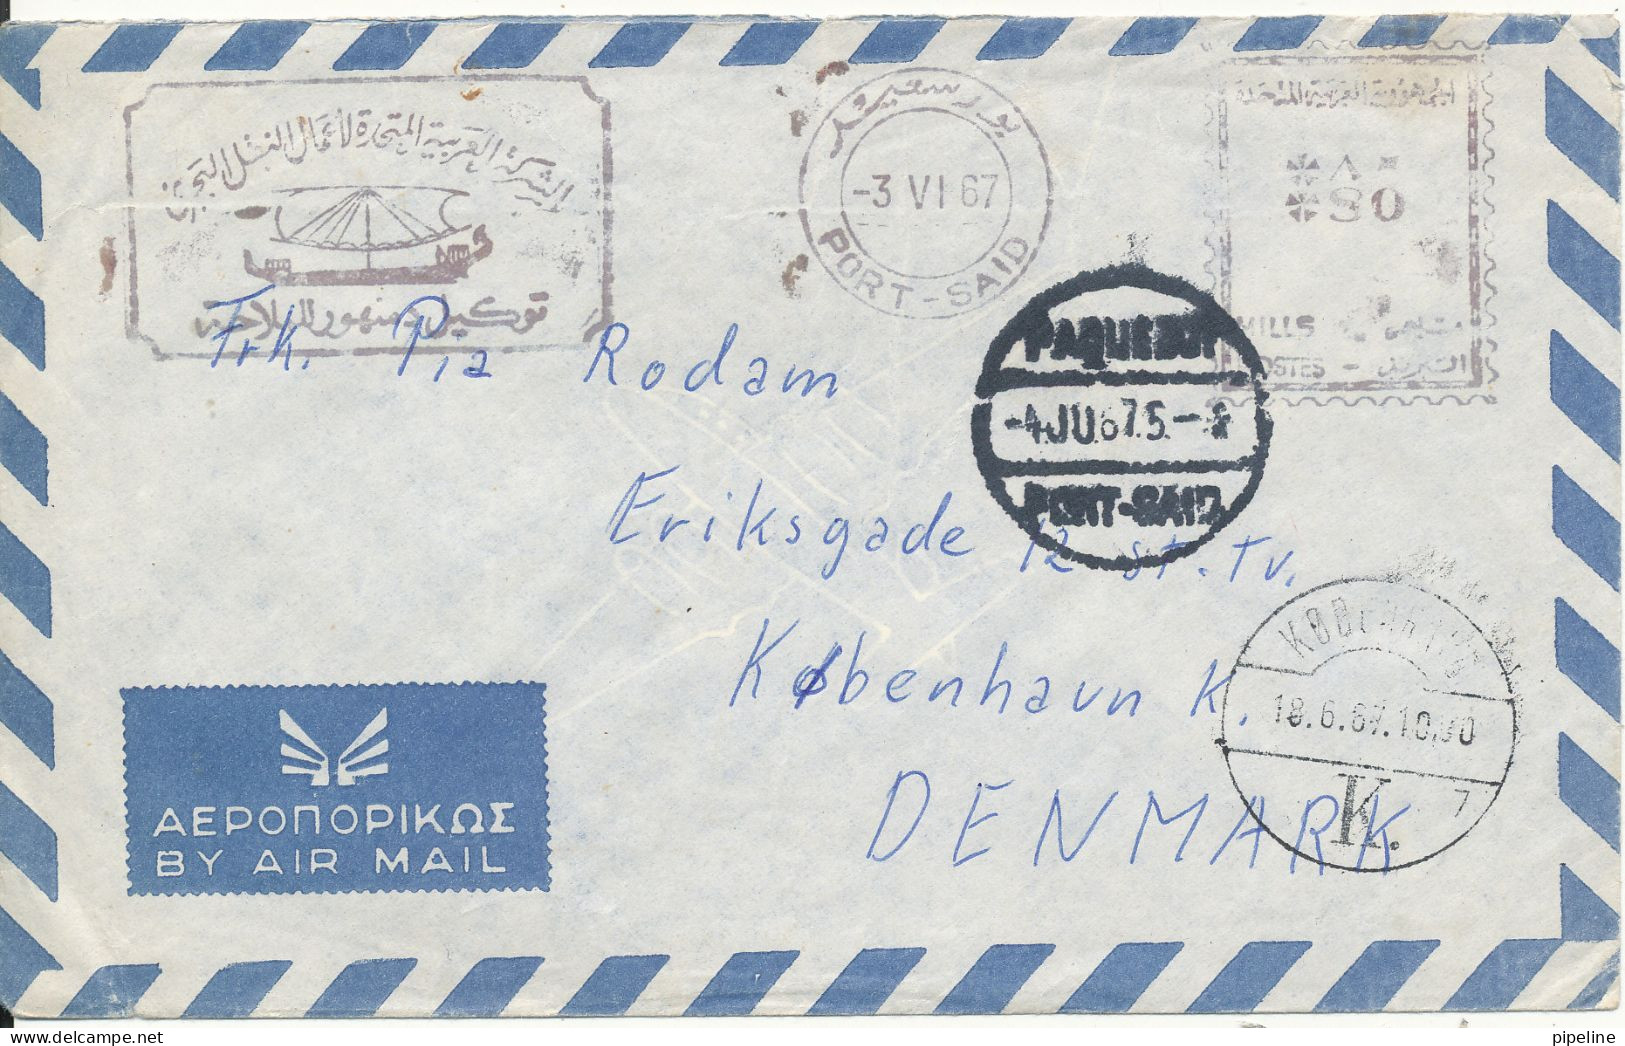 Egypt Air Mail Cover With Meter Cancel Sent To Denmark 3-6-1969 - Poste Aérienne